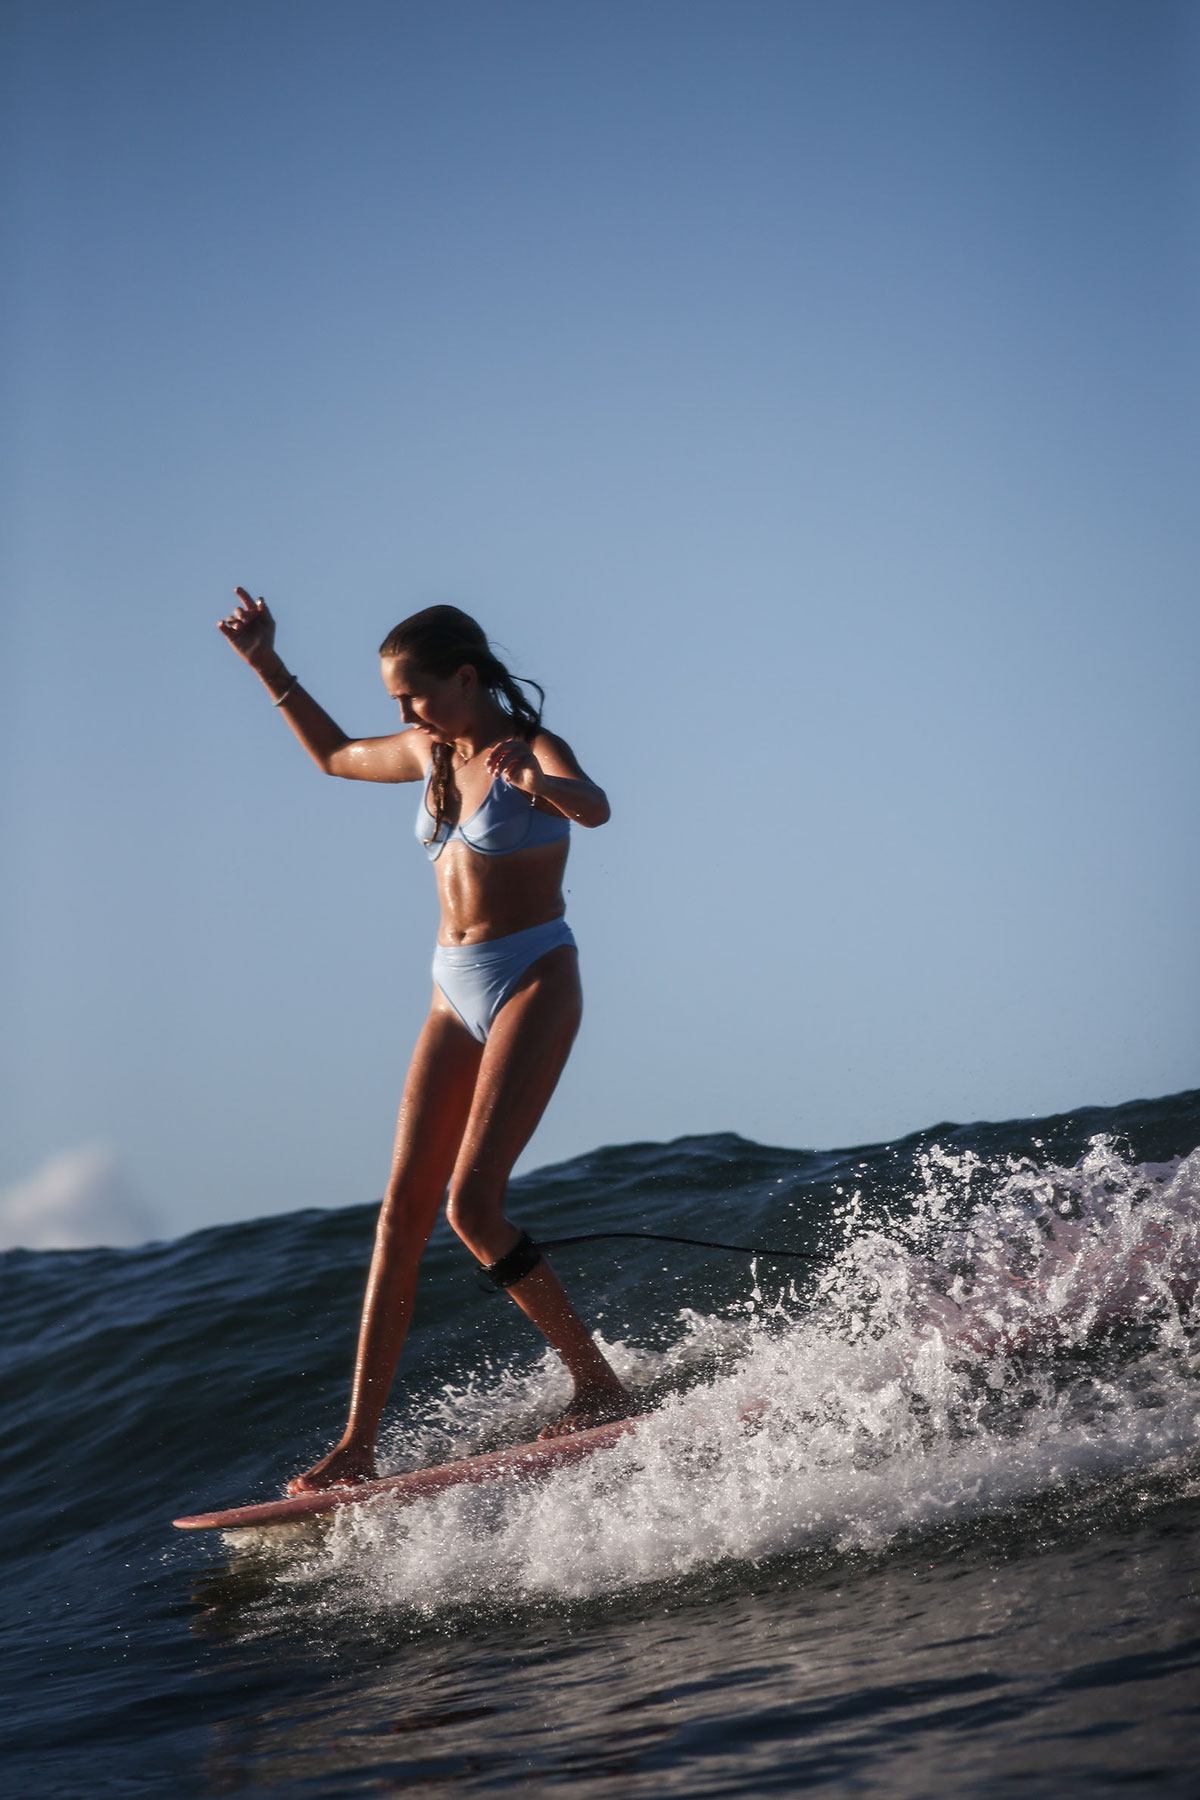 Nature of Surf Women, women surfing on edge of board